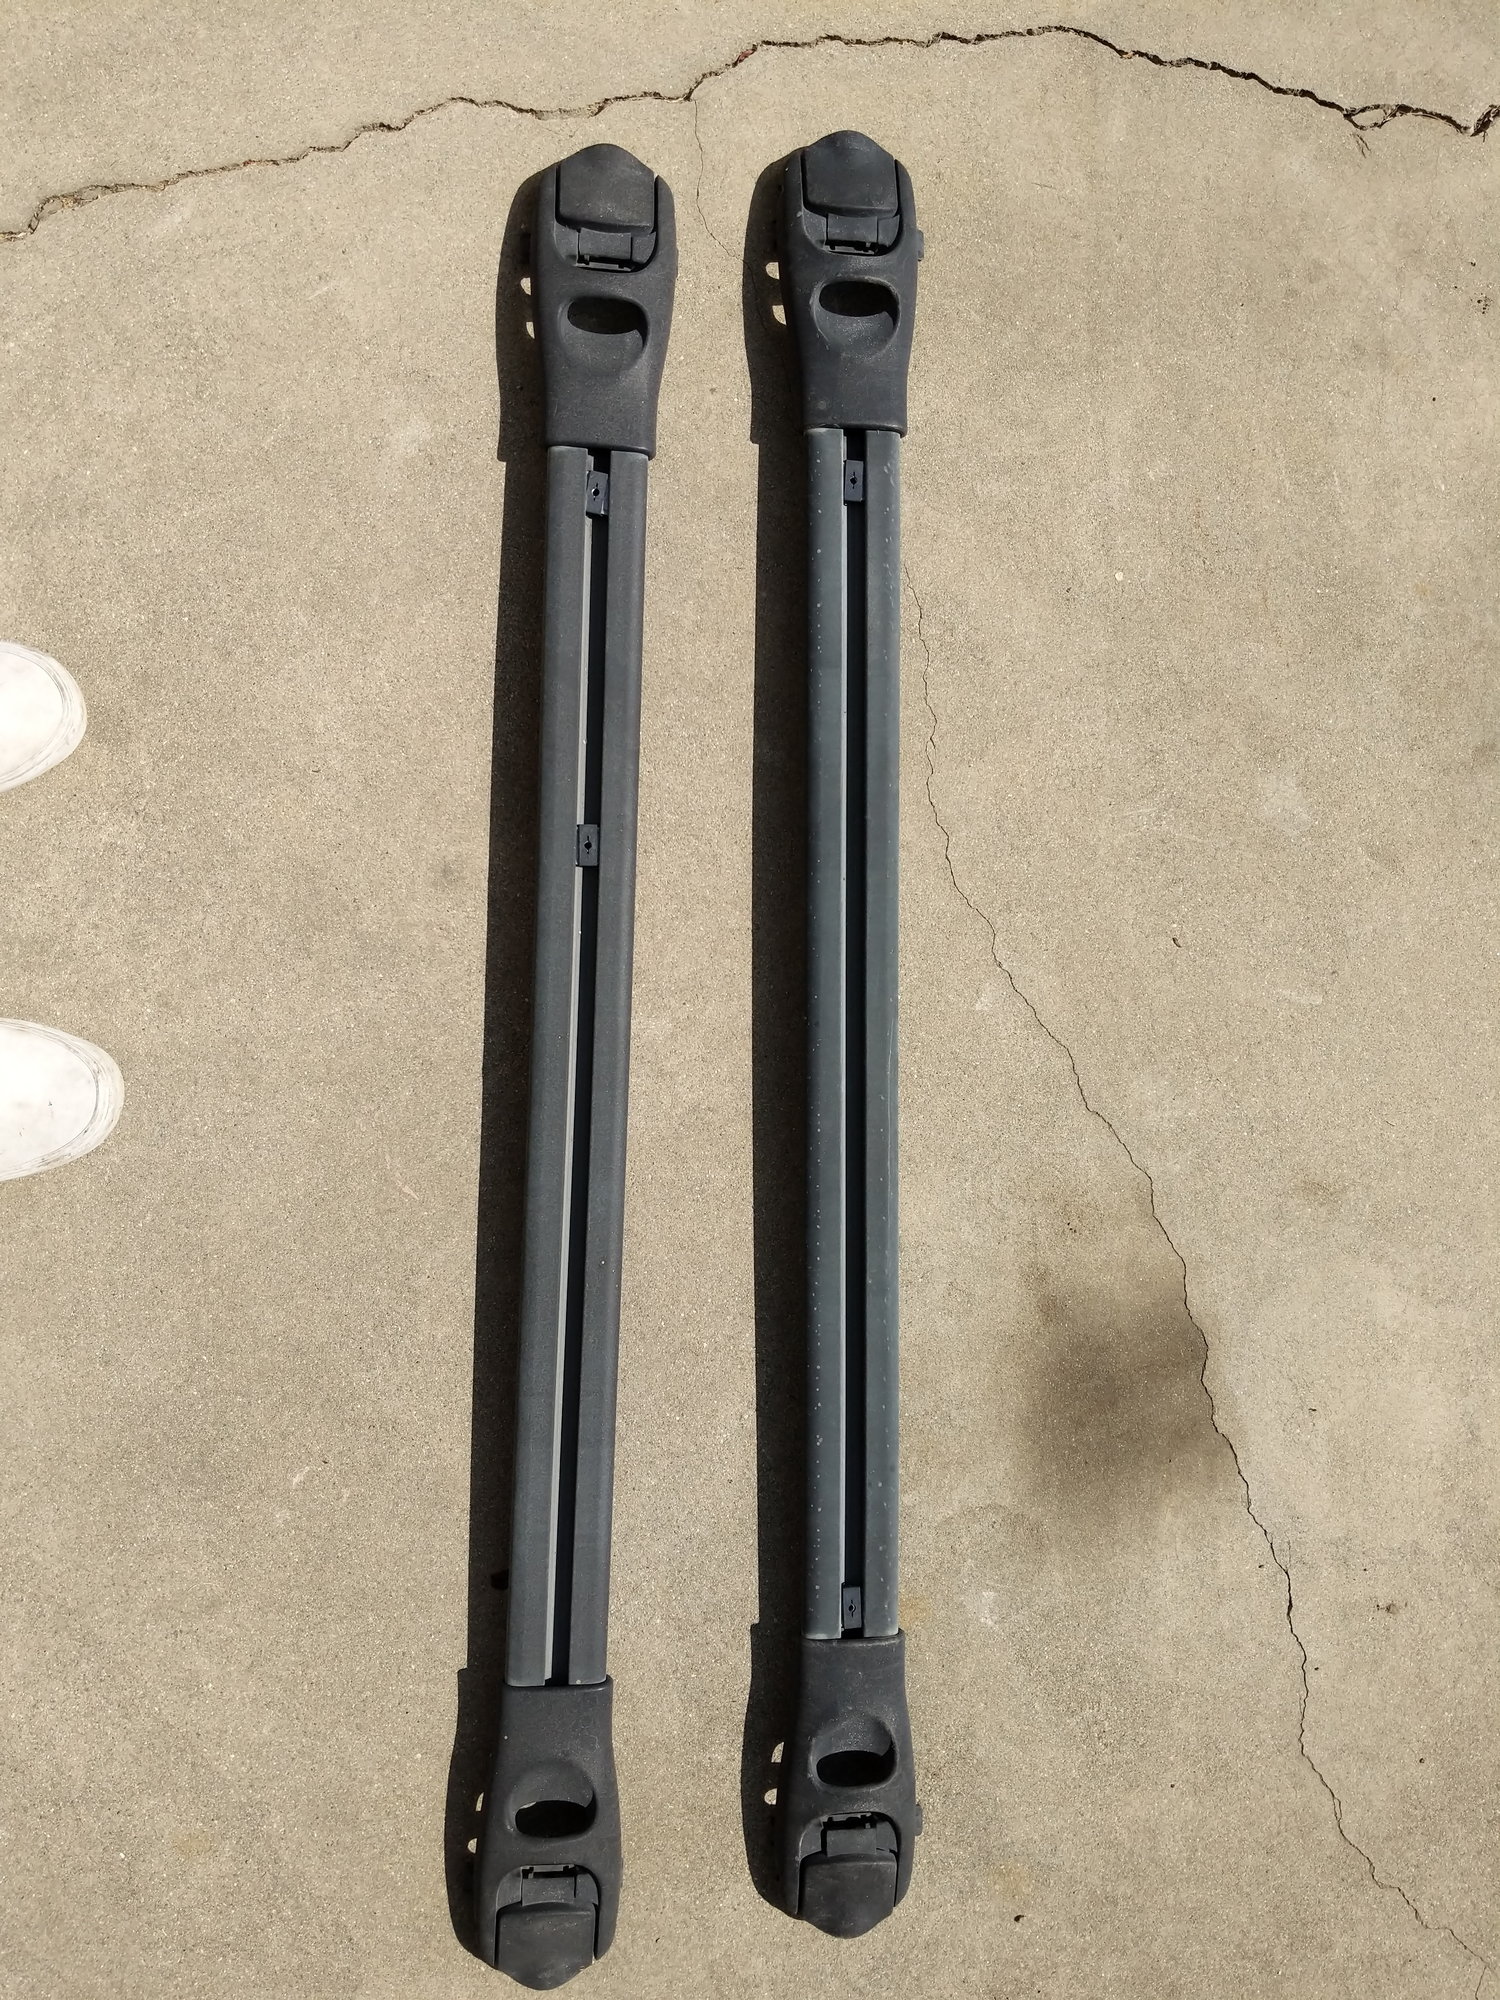 Exterior Body Parts - Excursion OEM roof rack cross bars - Used - 2000 to 2005 Ford Excursion - Long Beach, CA 90815, United States